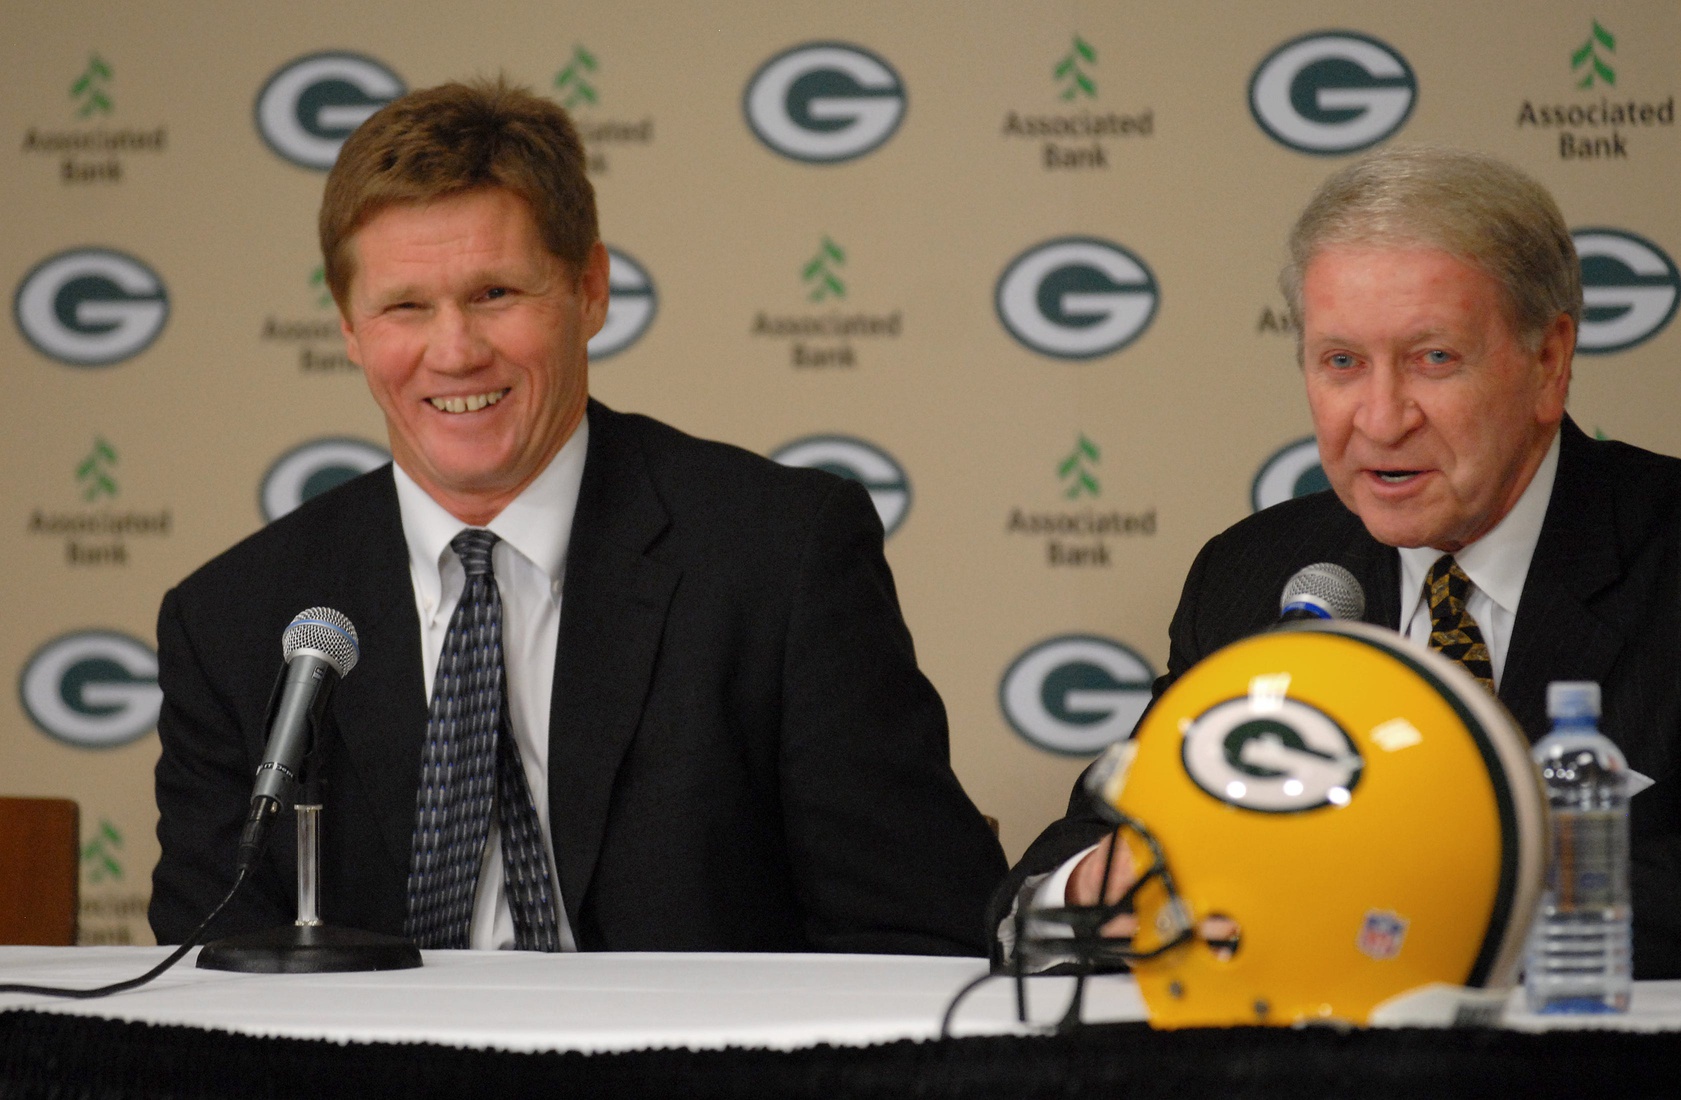 Green Bay Packers Local Revenue Declines $150 Million